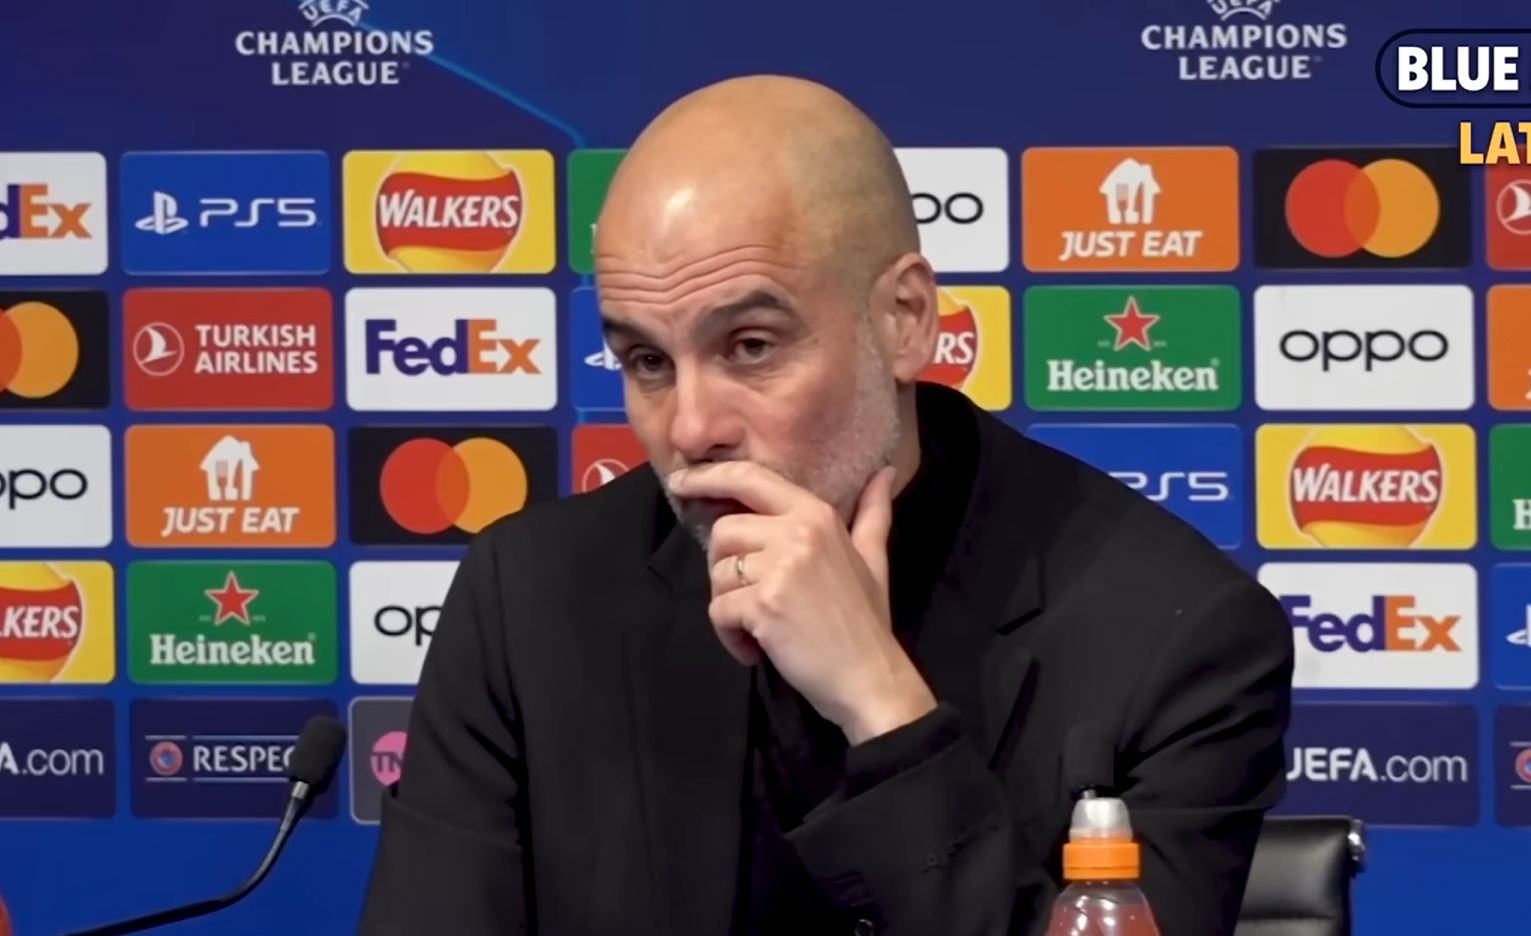 Manchester City manager Pep Guardiola on Real Madrid – ‘What a hell of a way to lose’